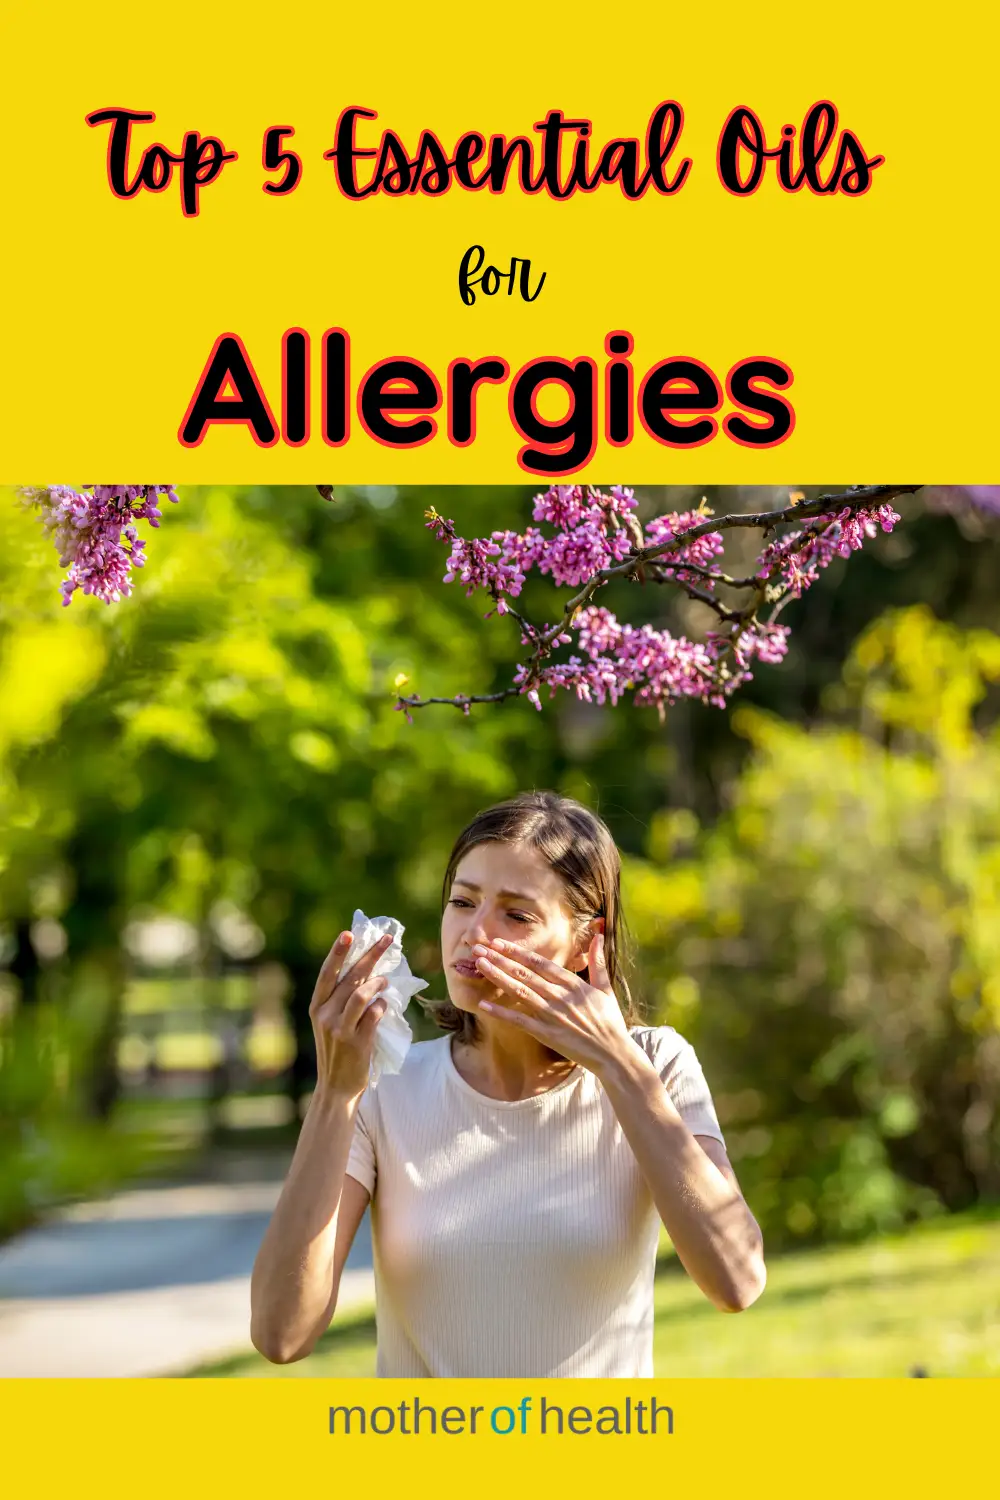 top 5 essential oils for allergies Pinterest Pin Image